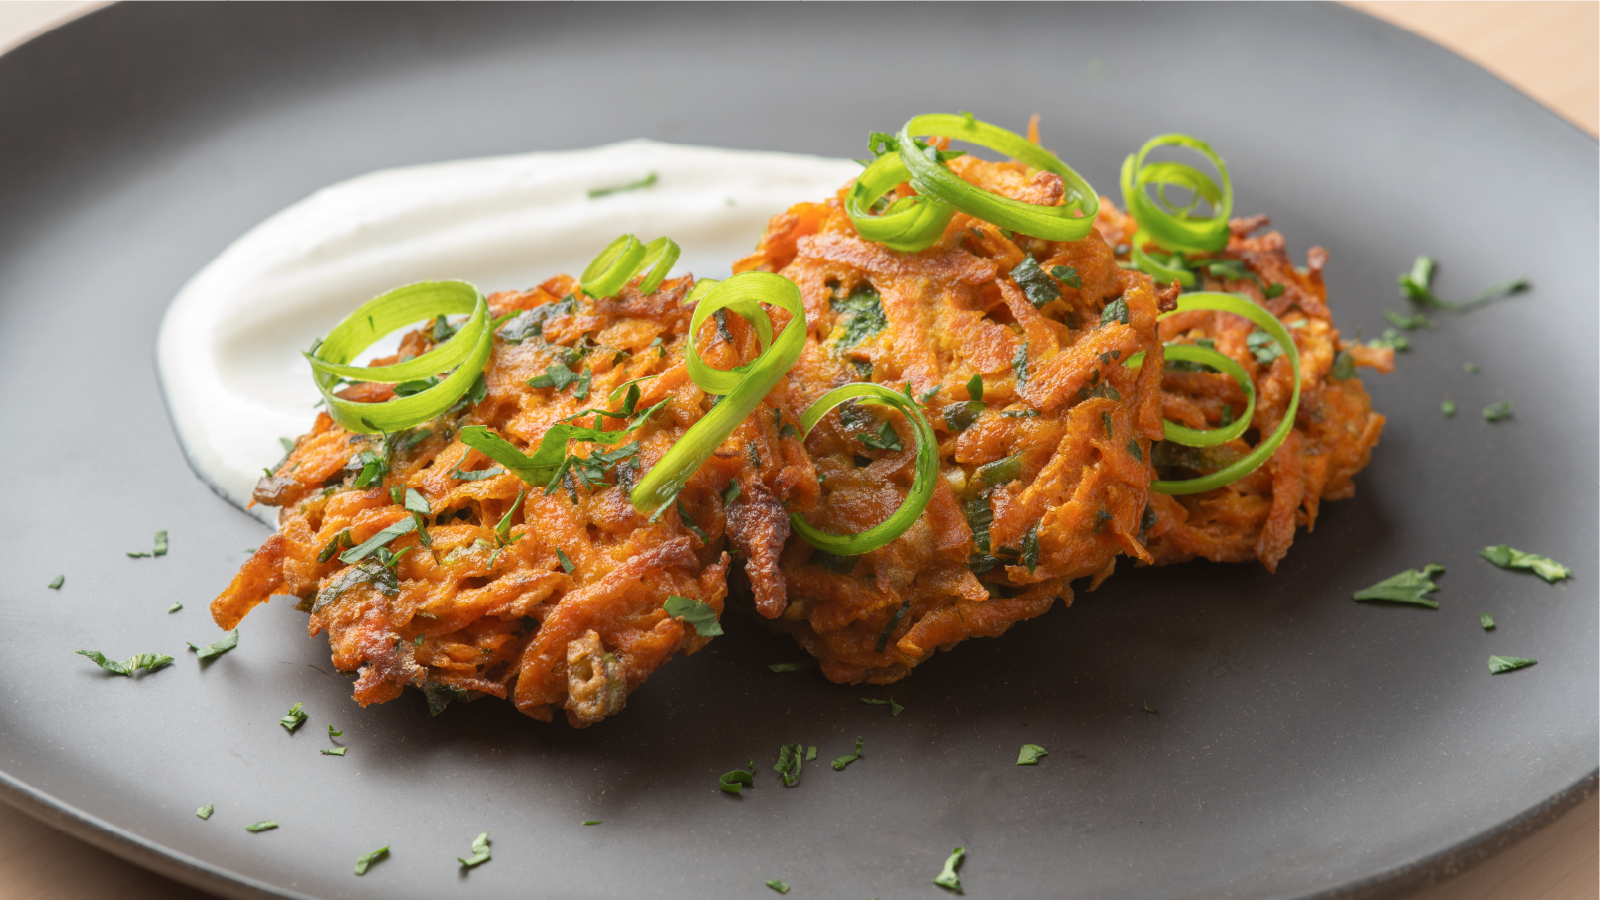 Carrot fritters with herb yogurt on black plate.